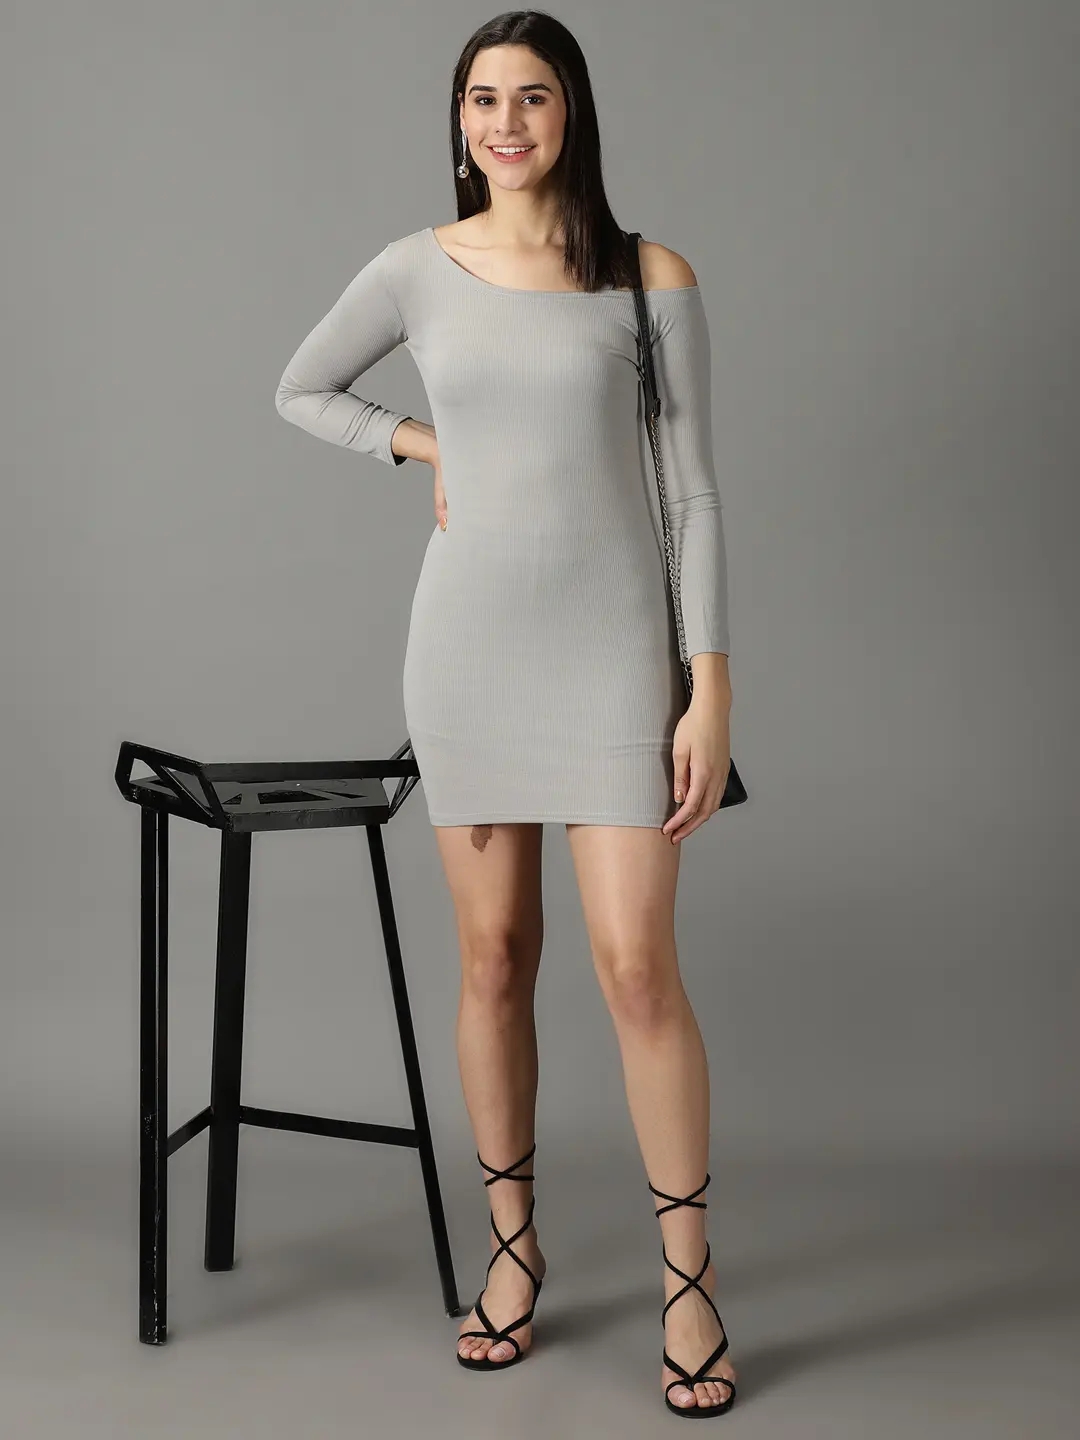 Showoff | SHOWOFF Women Grey Solid Asymmetric Neck Full Sleeves Above Knee Bodycon Dress 4